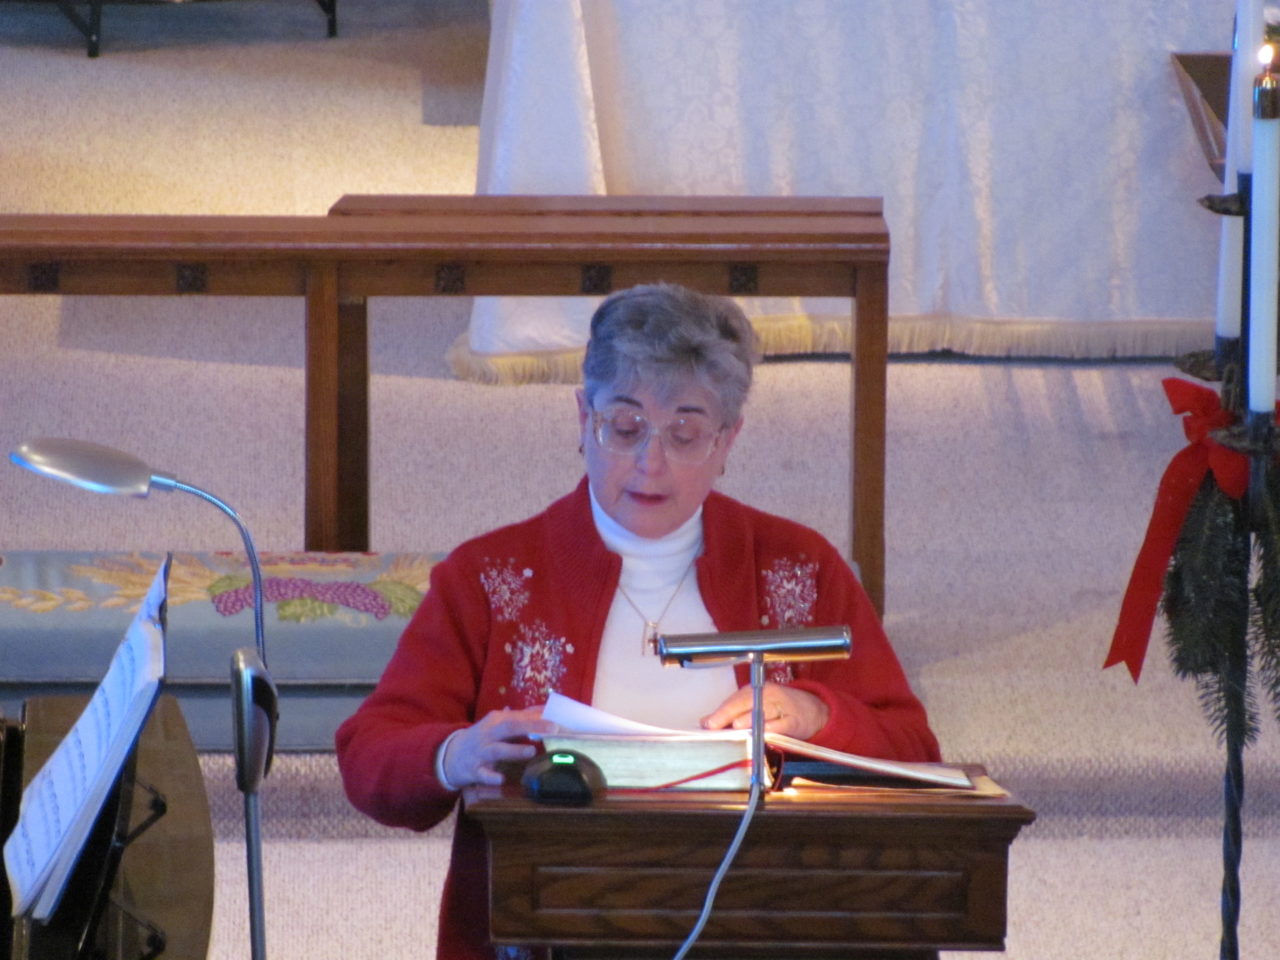 A Reader at our Lessons and Carols service